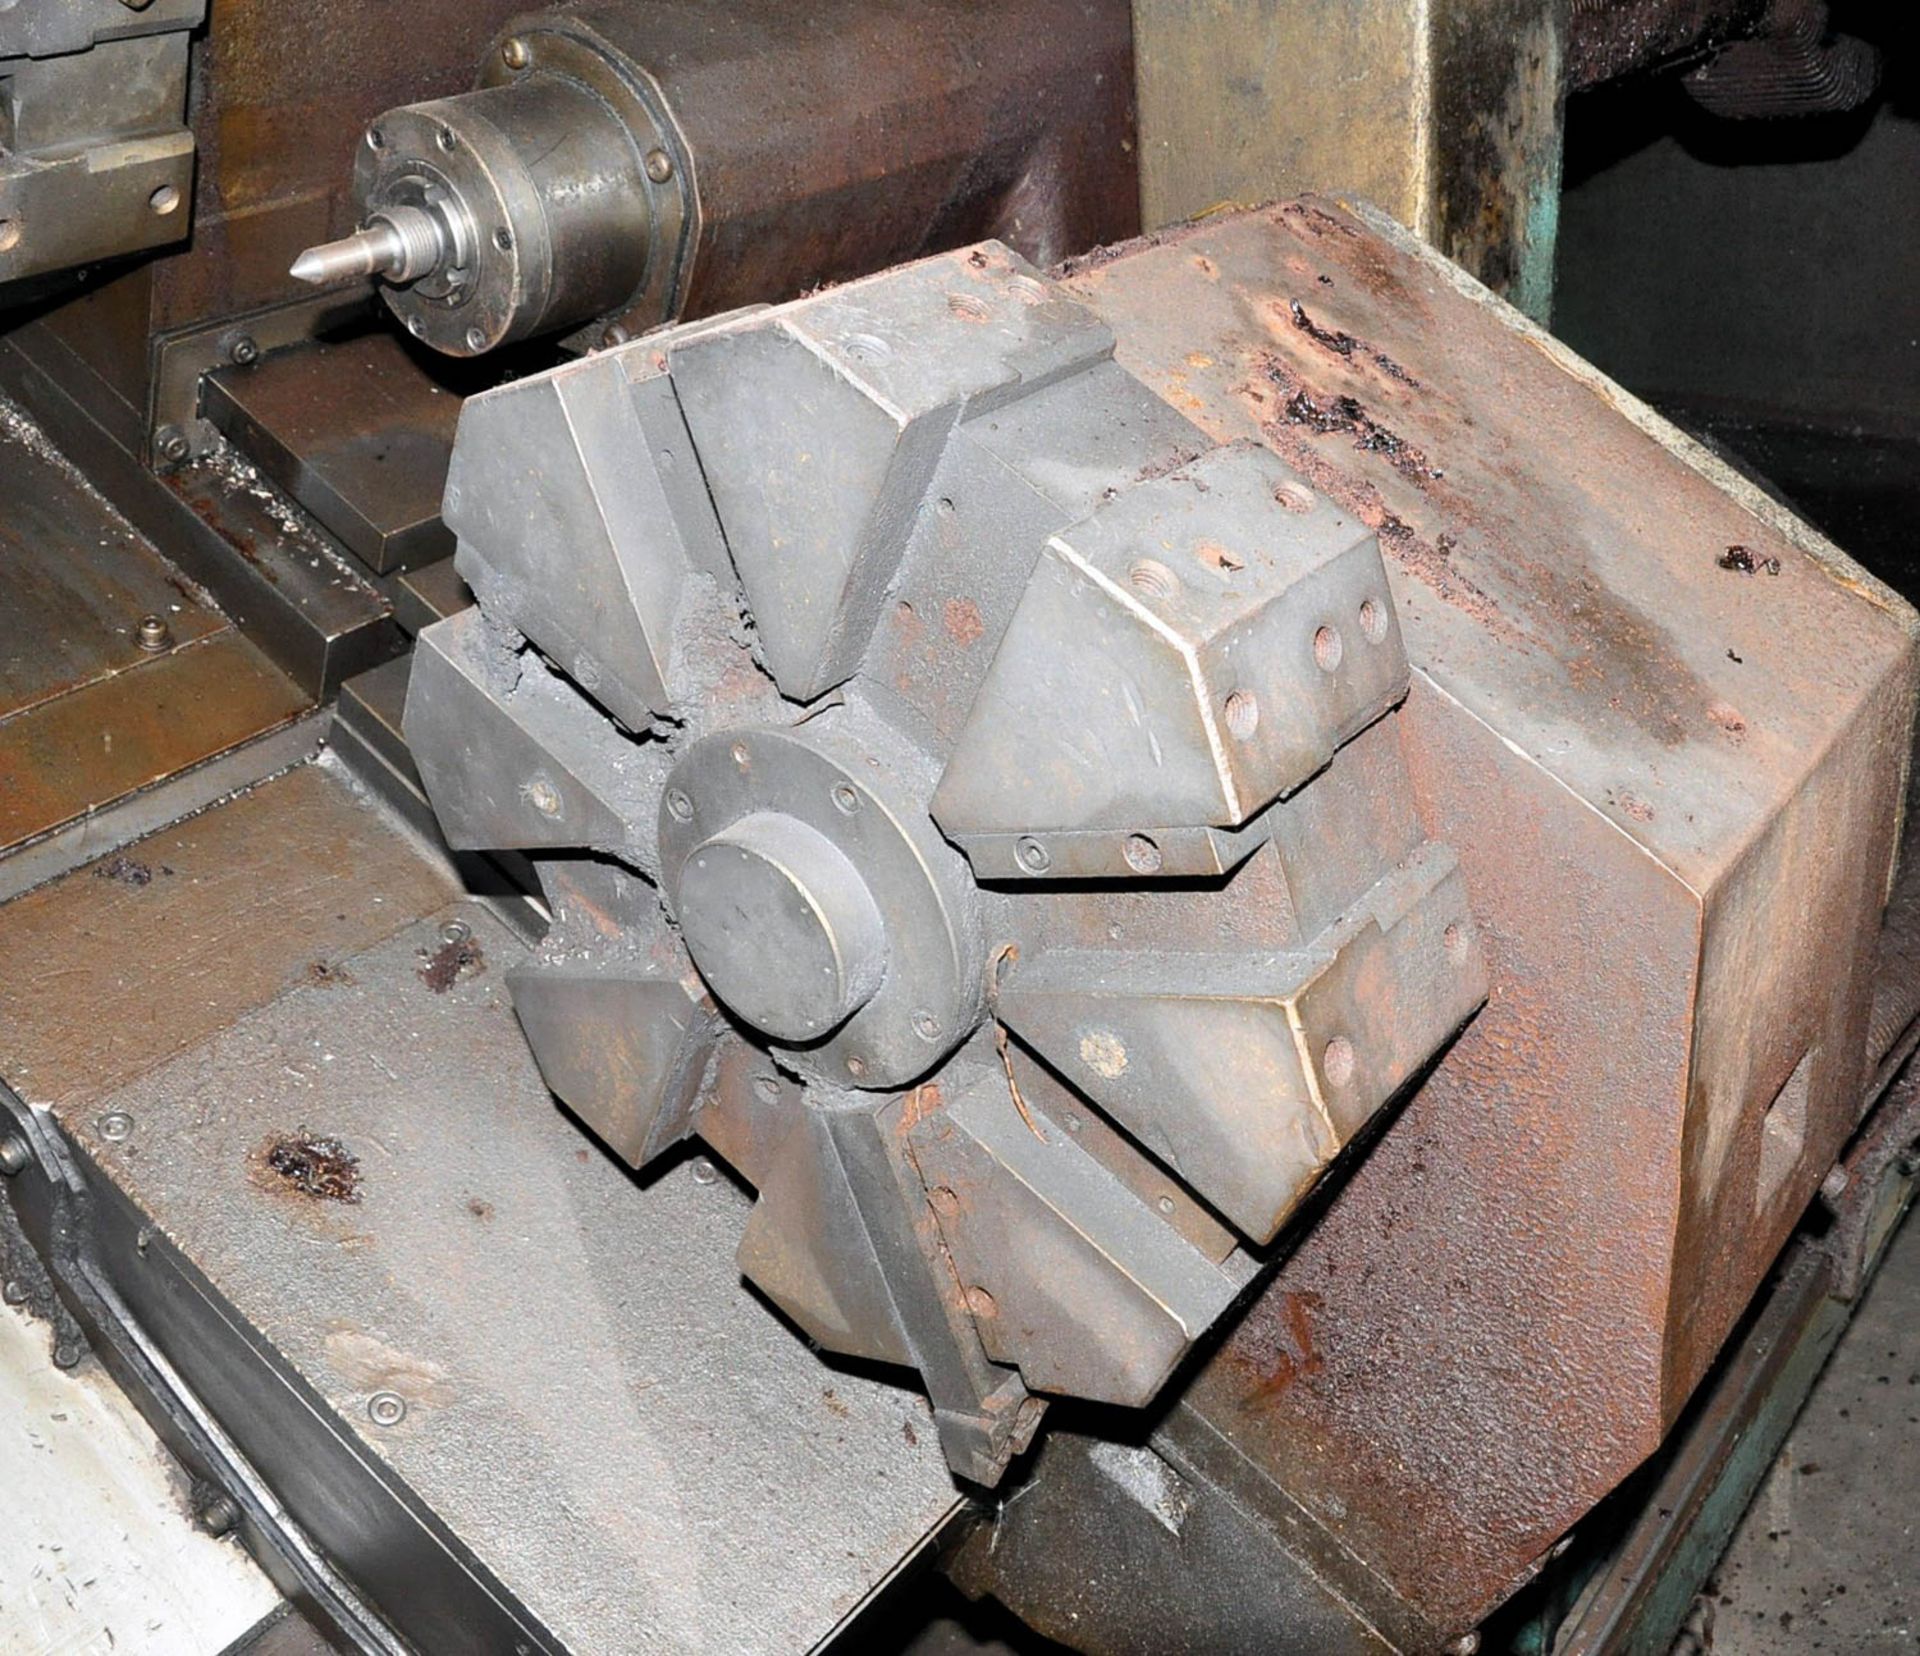 MAZAK MDL. QUICK SLANT 30, 4-AXIS CNC TURNING CENTER, S/N: N/A, (#4252), (WAREHOUSE-TIFFIN) - Image 5 of 6